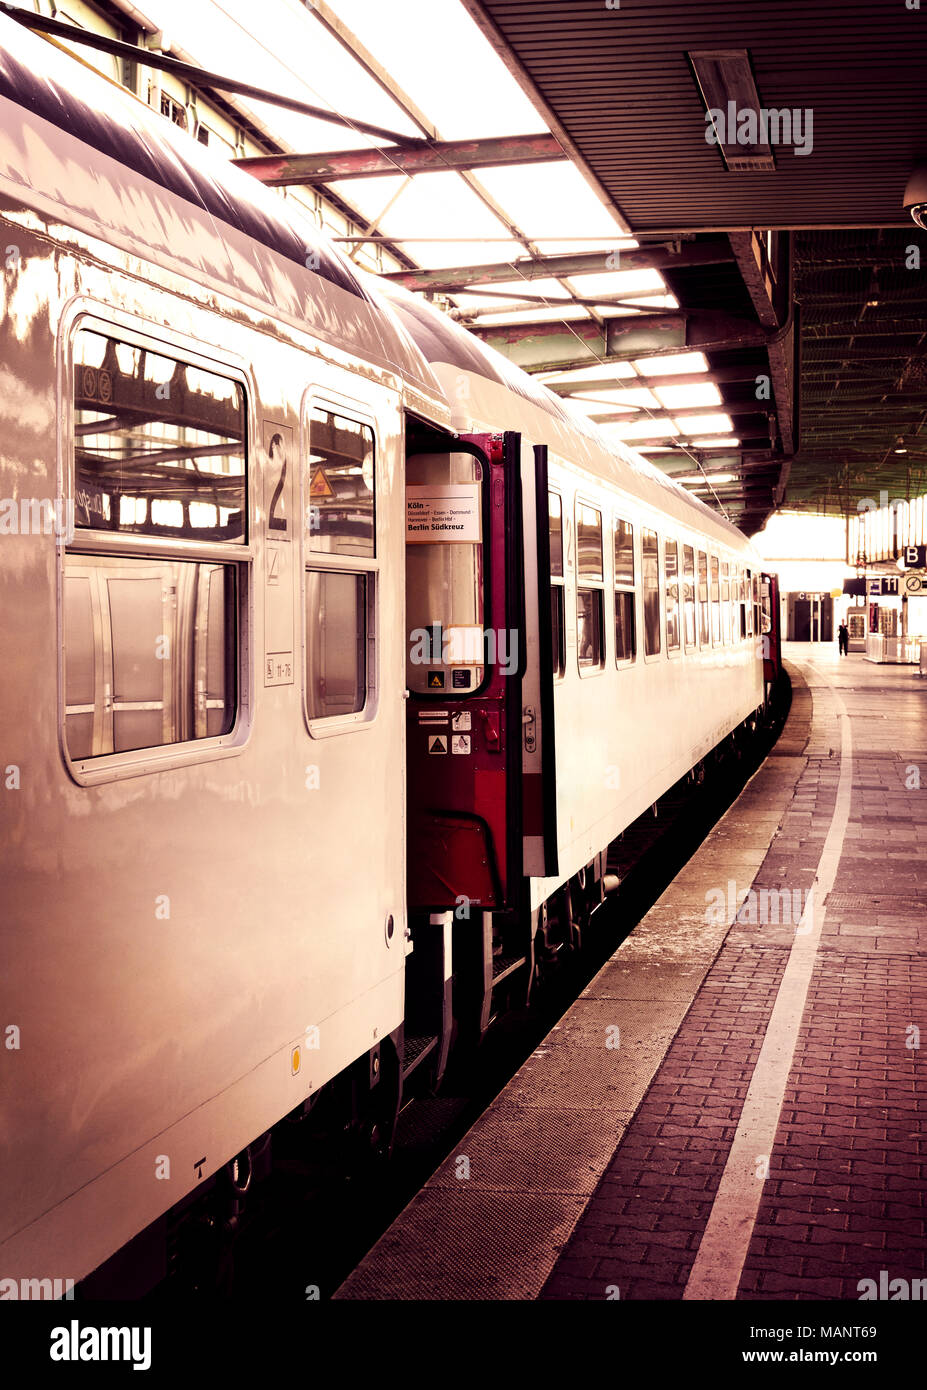 Old train in a railway station with open doors. Sepia toned image. Stock Photo